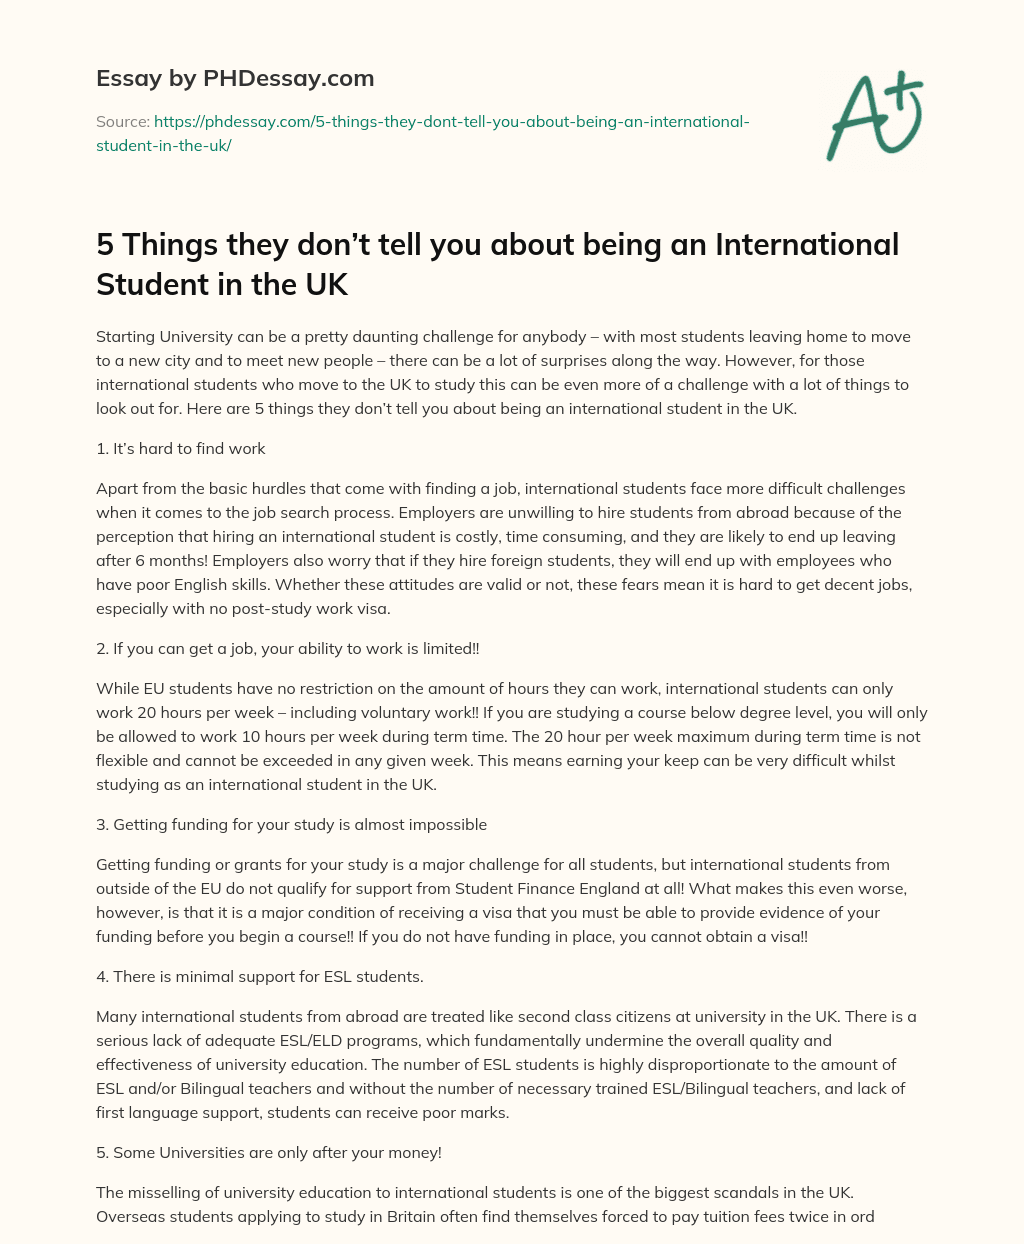 5 Things they don’t tell you about being an International Student in the UK essay